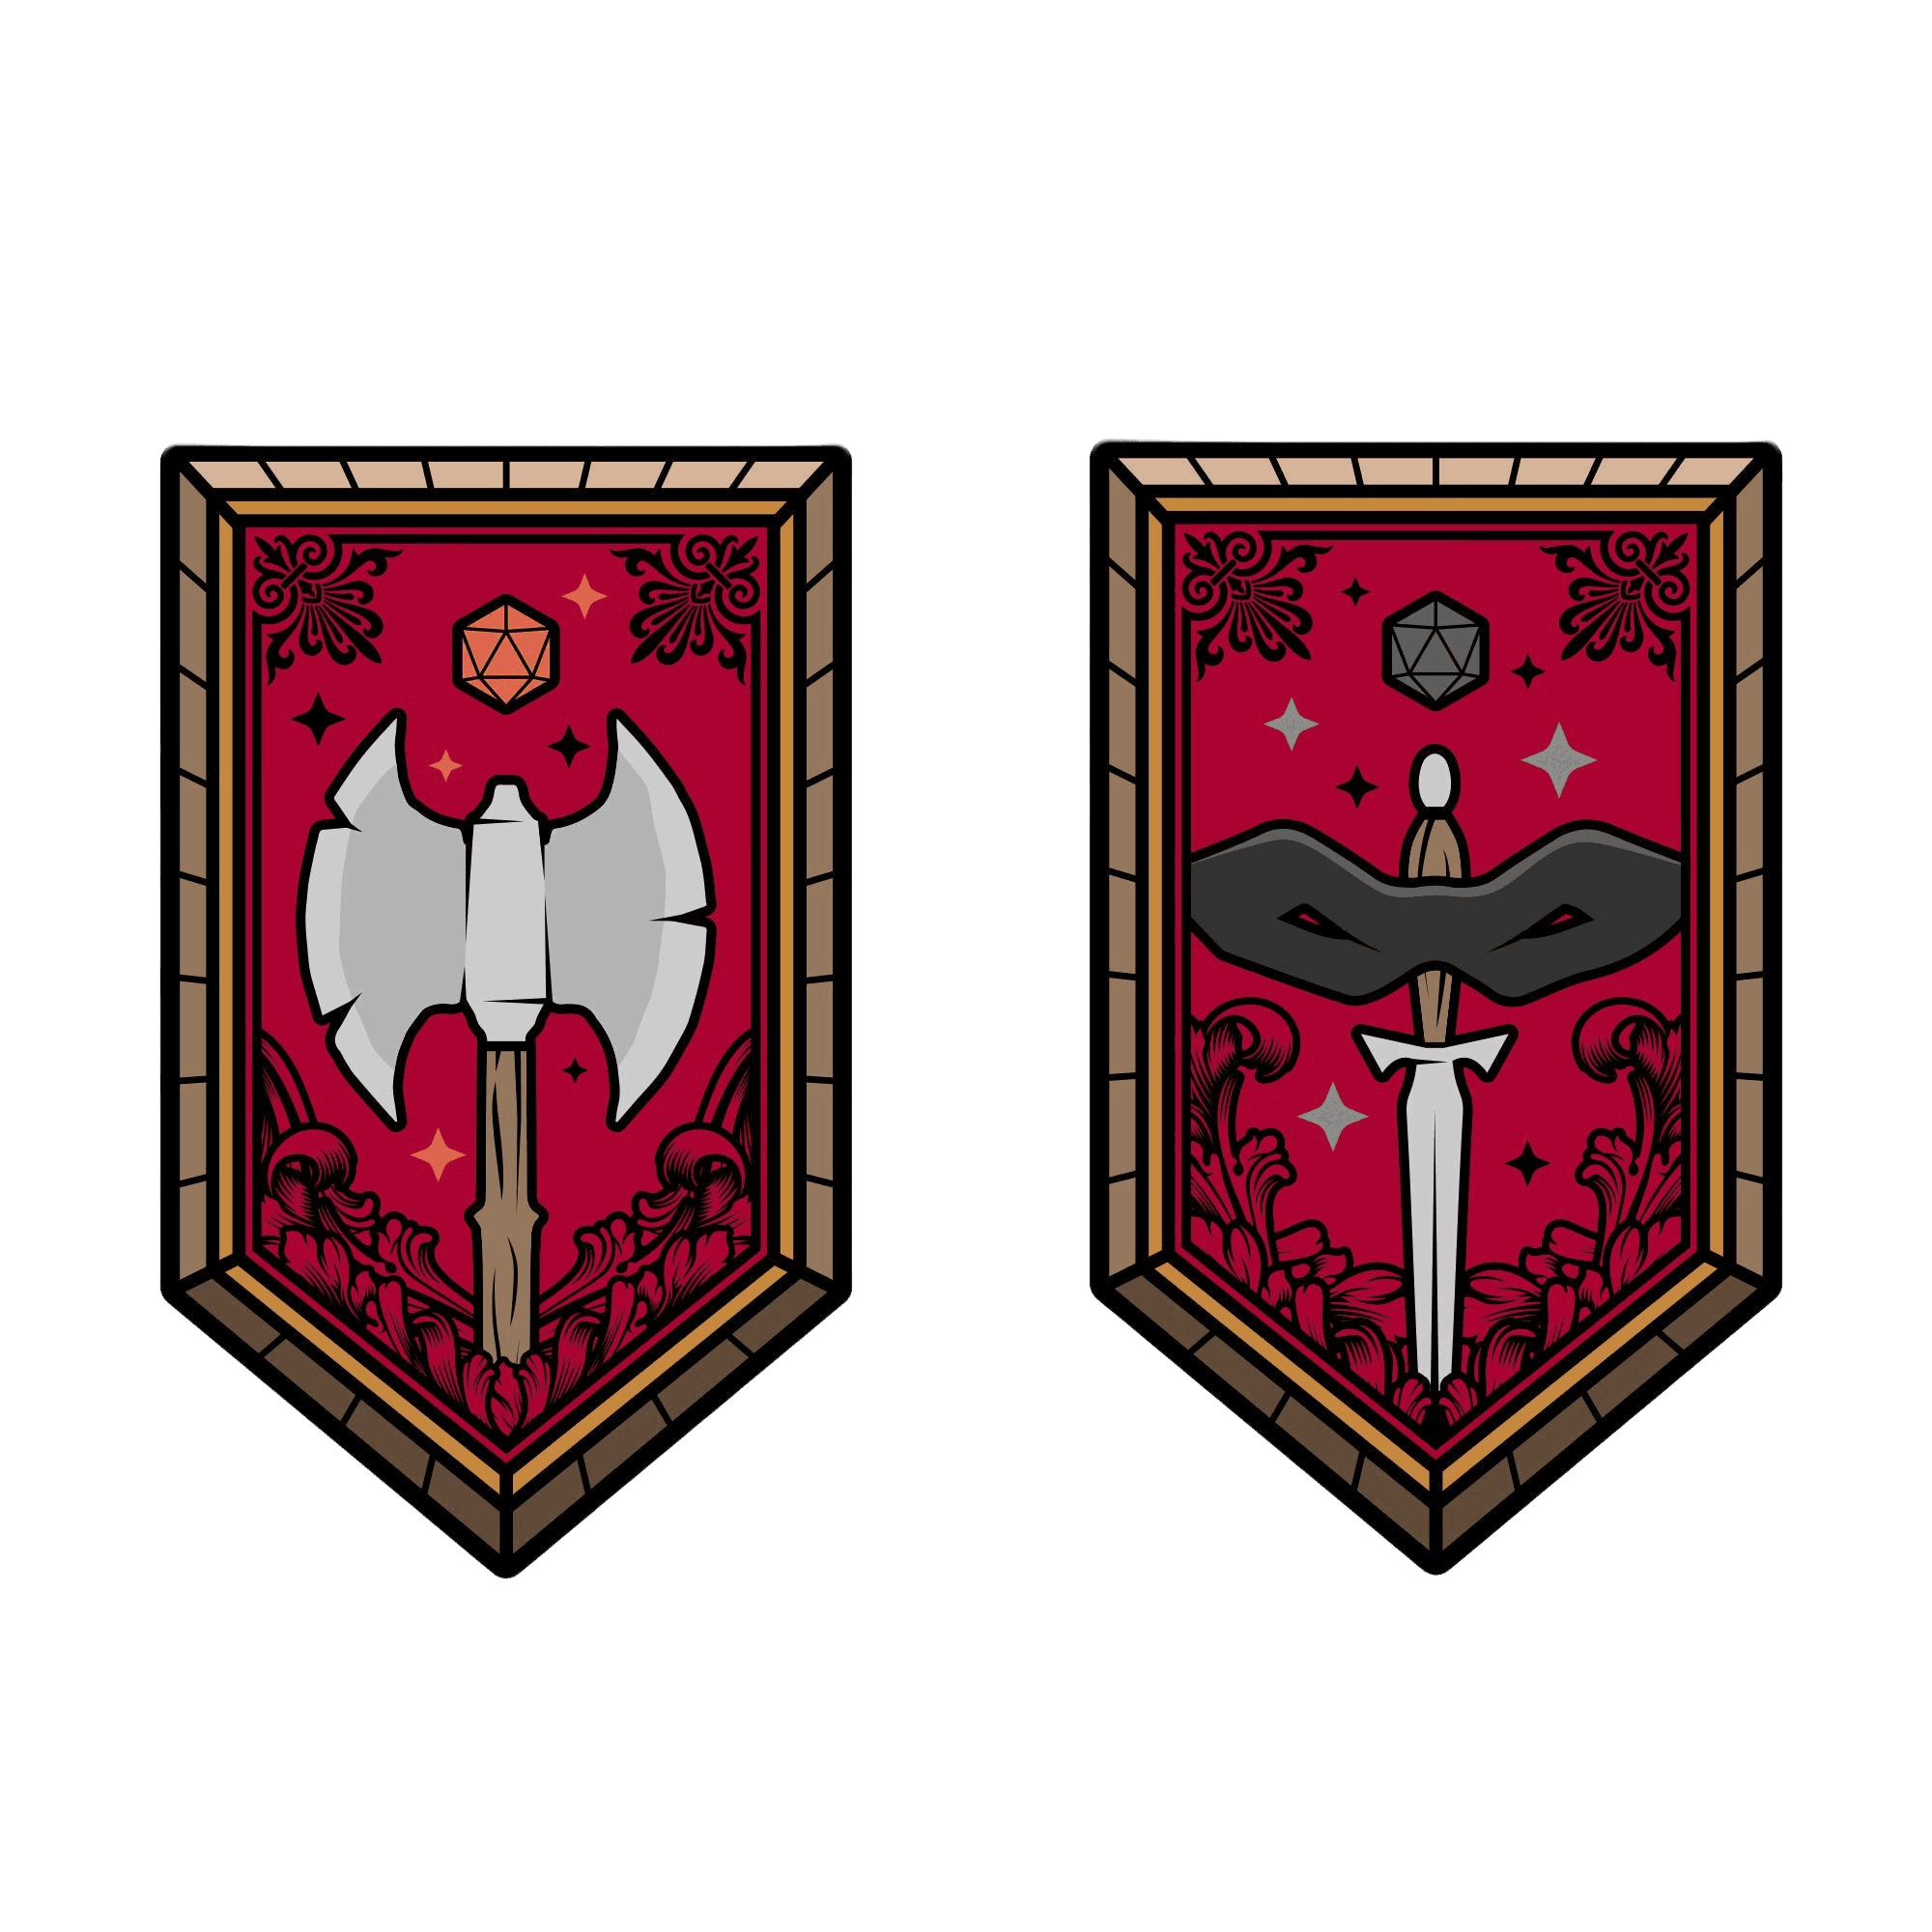 Pinfinity: Dungeons & Dragons - Augmented Reality Class AR Pin Set (Limited Edition) - The Card Vault